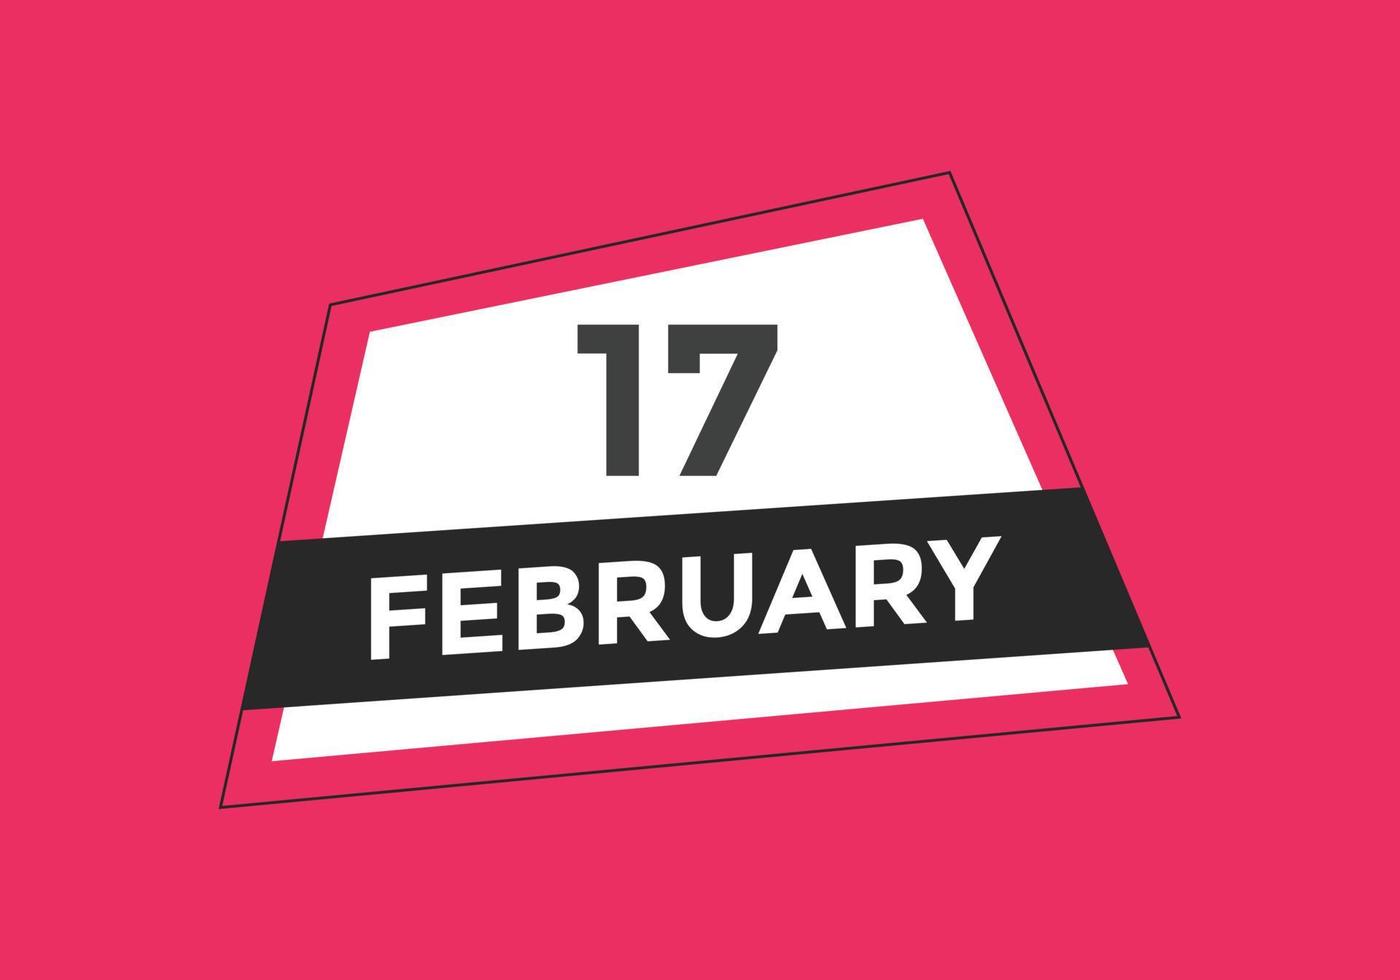 february 17 calendar reminder. 17th february daily calendar icon template. Calendar 17th february icon Design template. Vector illustration